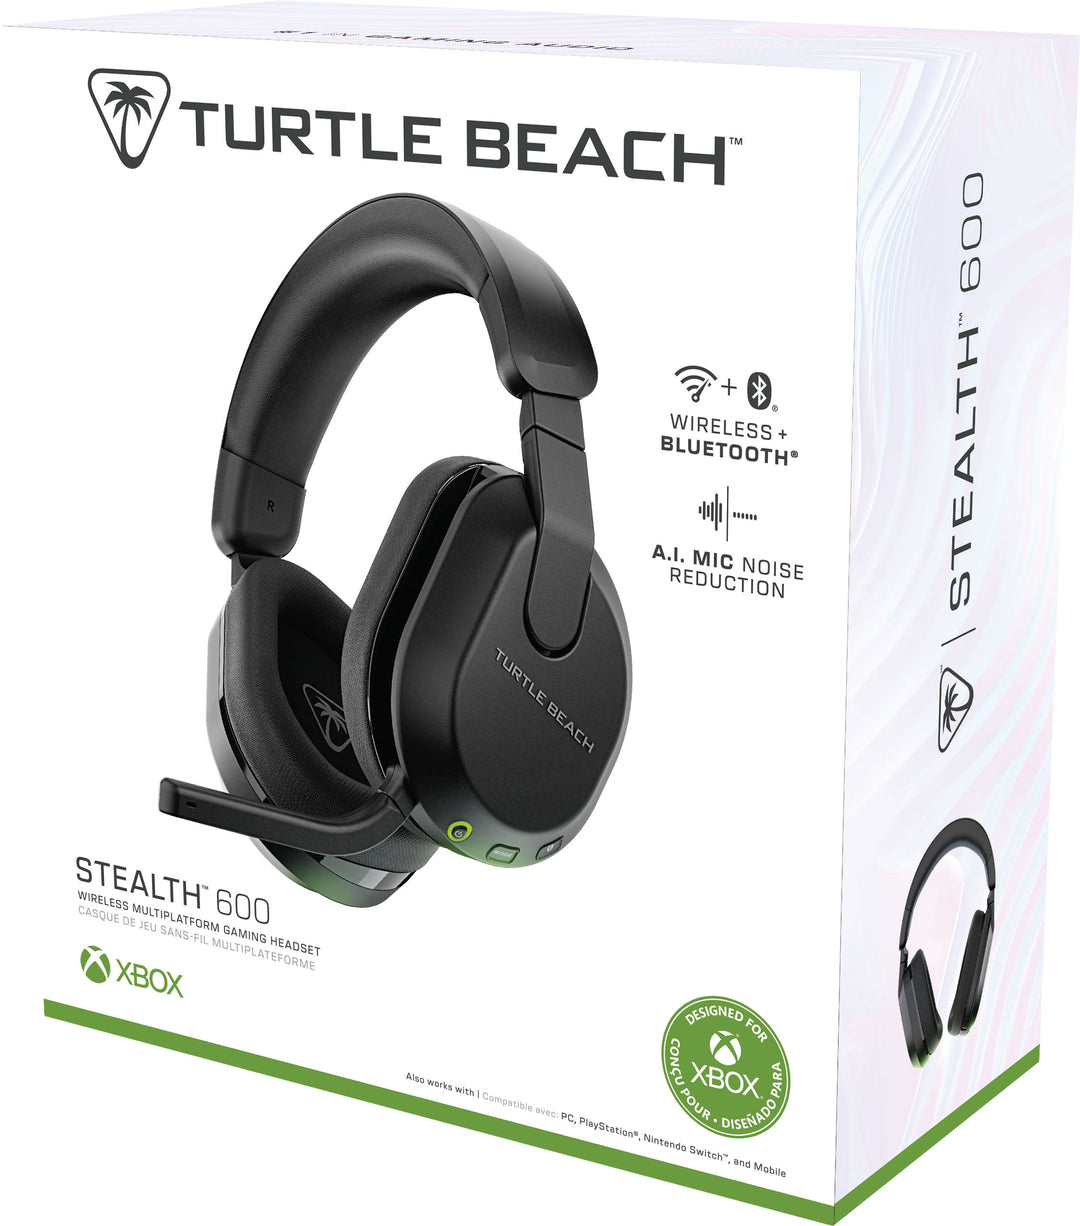 Turtle Beach Stealth 600 Wireless Gaming Headset for Xbox Series X|S, PC, PS5, PS4, Nintendo Switch with 80-Hr Battery - Black_11